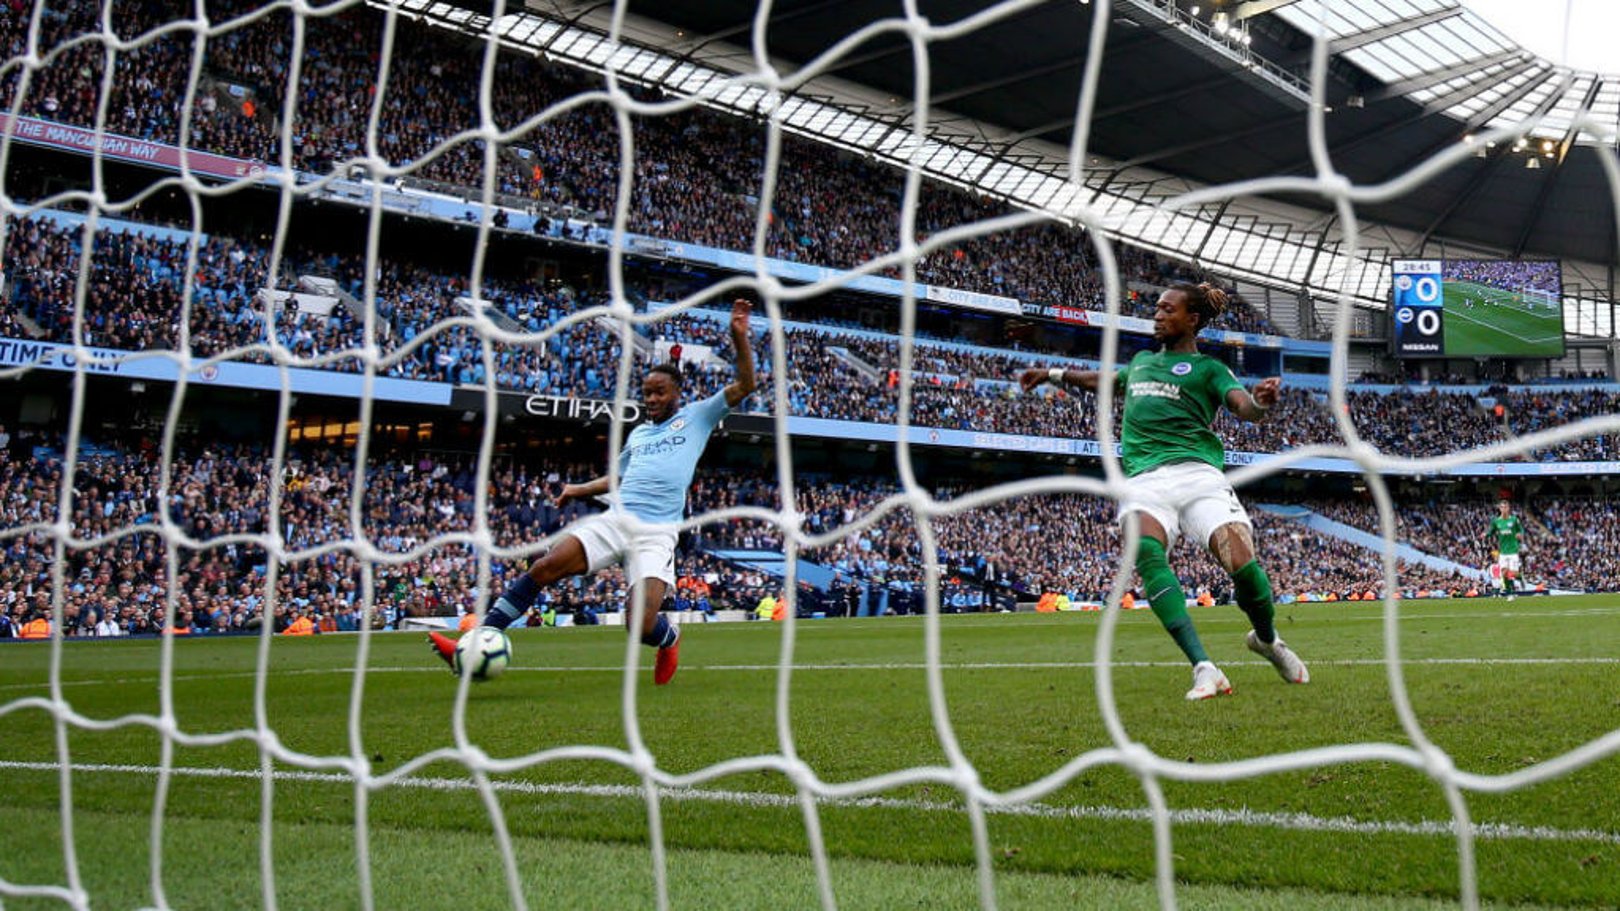 TAP IN: It's a simple finish for Raheem as he makes it 1-0 City